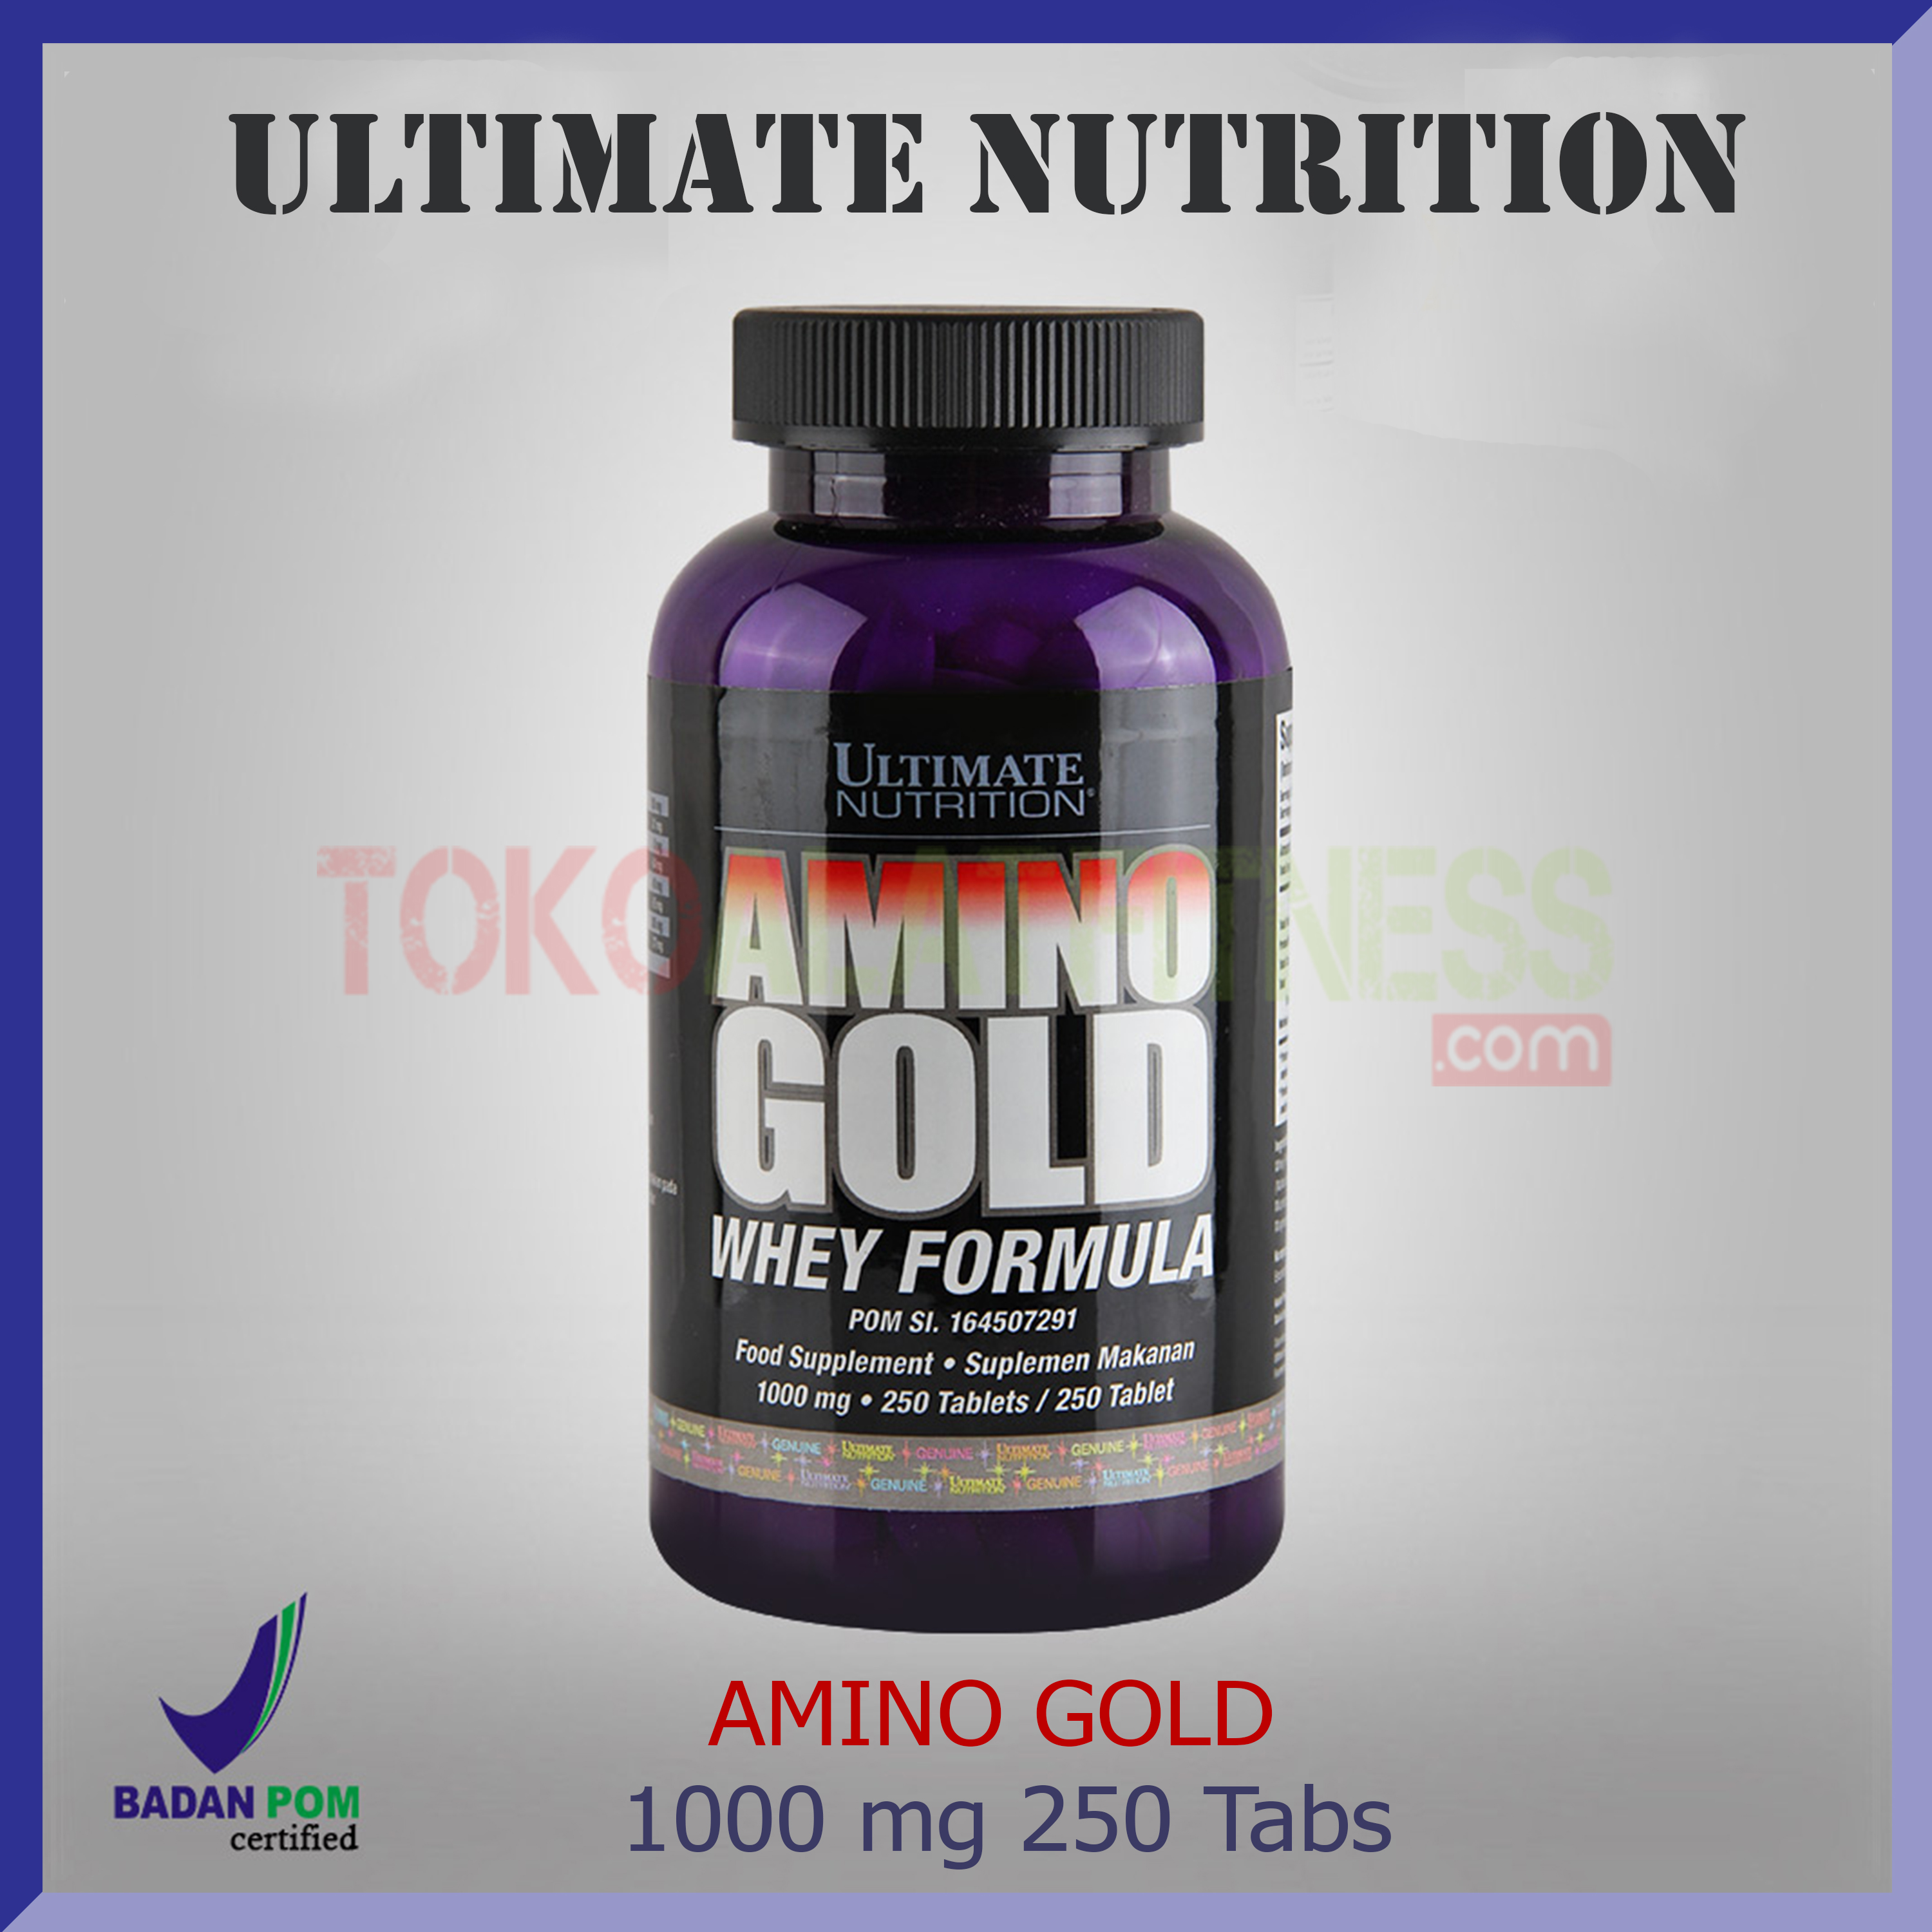 ULTIMATE NUTRITION AMINO GOLD - Suplemen Ultimate Amino Gold 1000mg 250Tabs